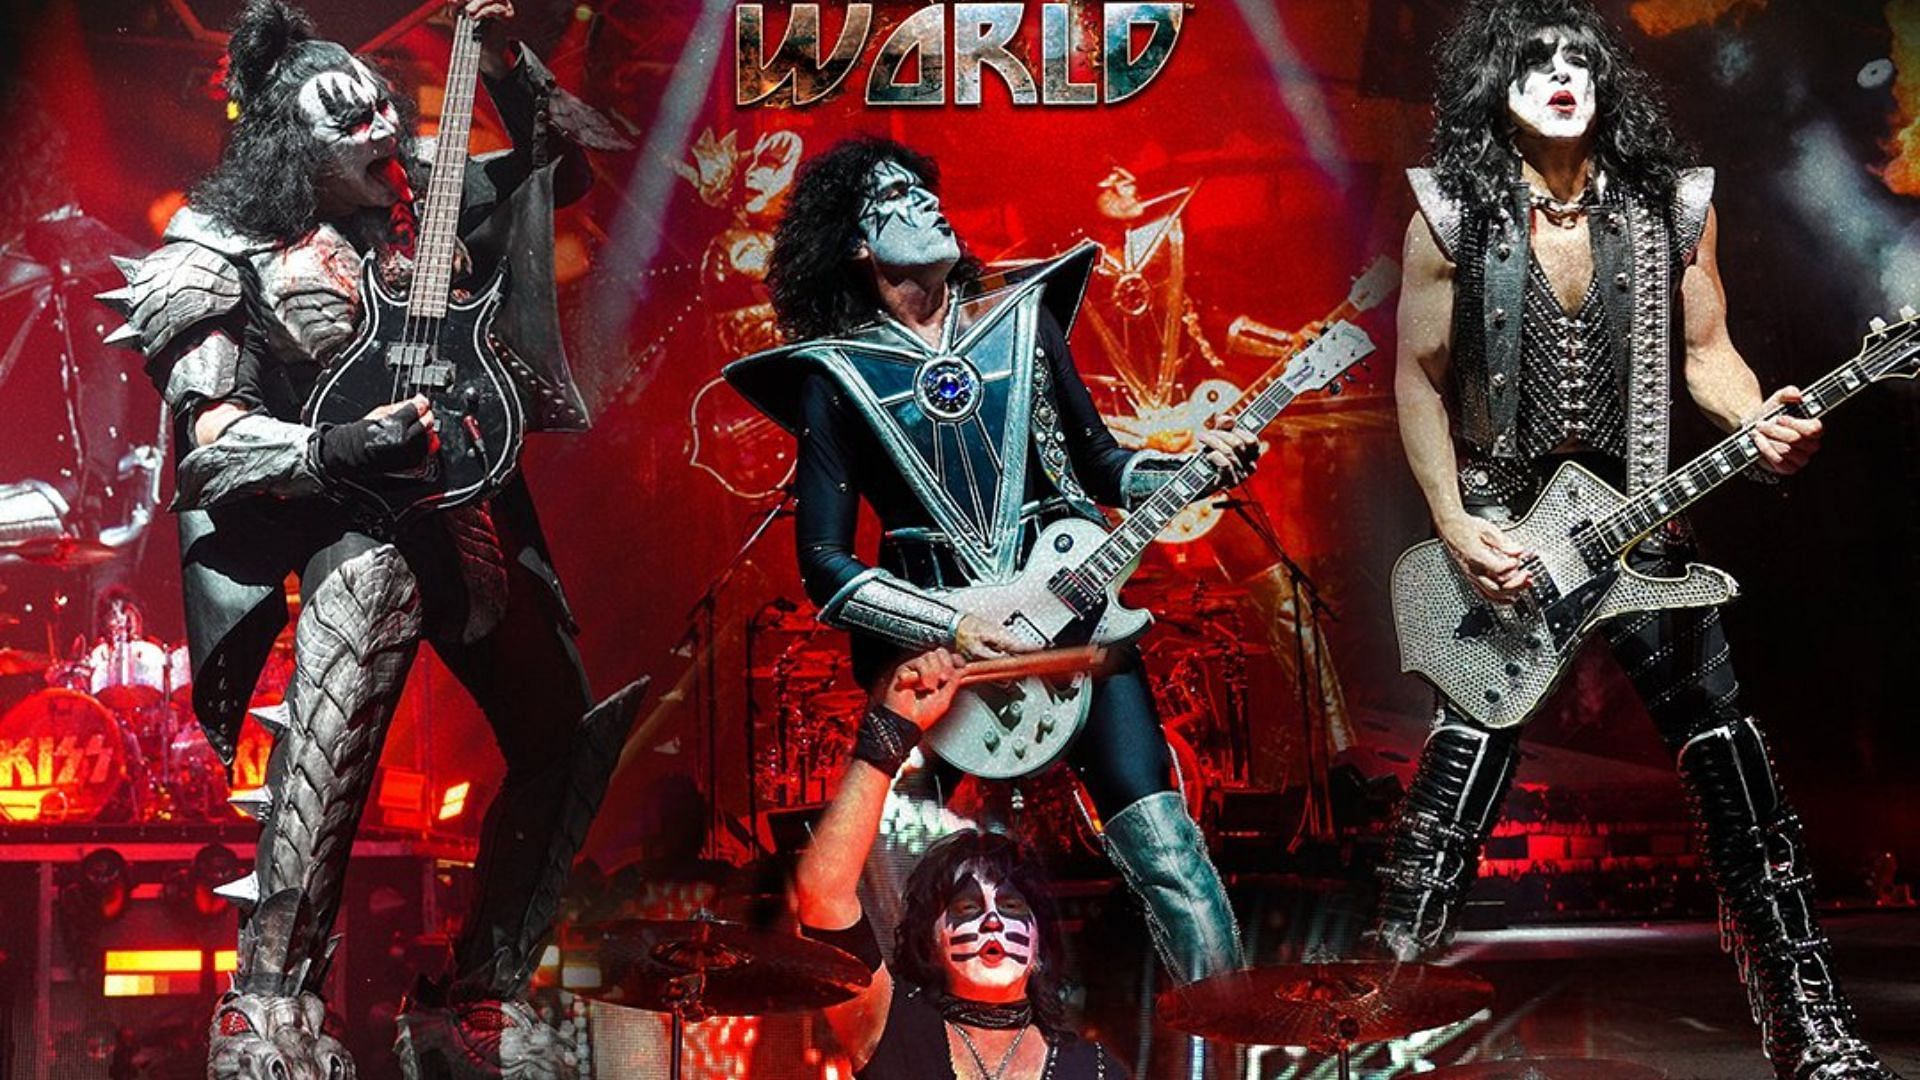 End of the Road Tour KISS Farewell Tour 2023 Tickets, presale, dates